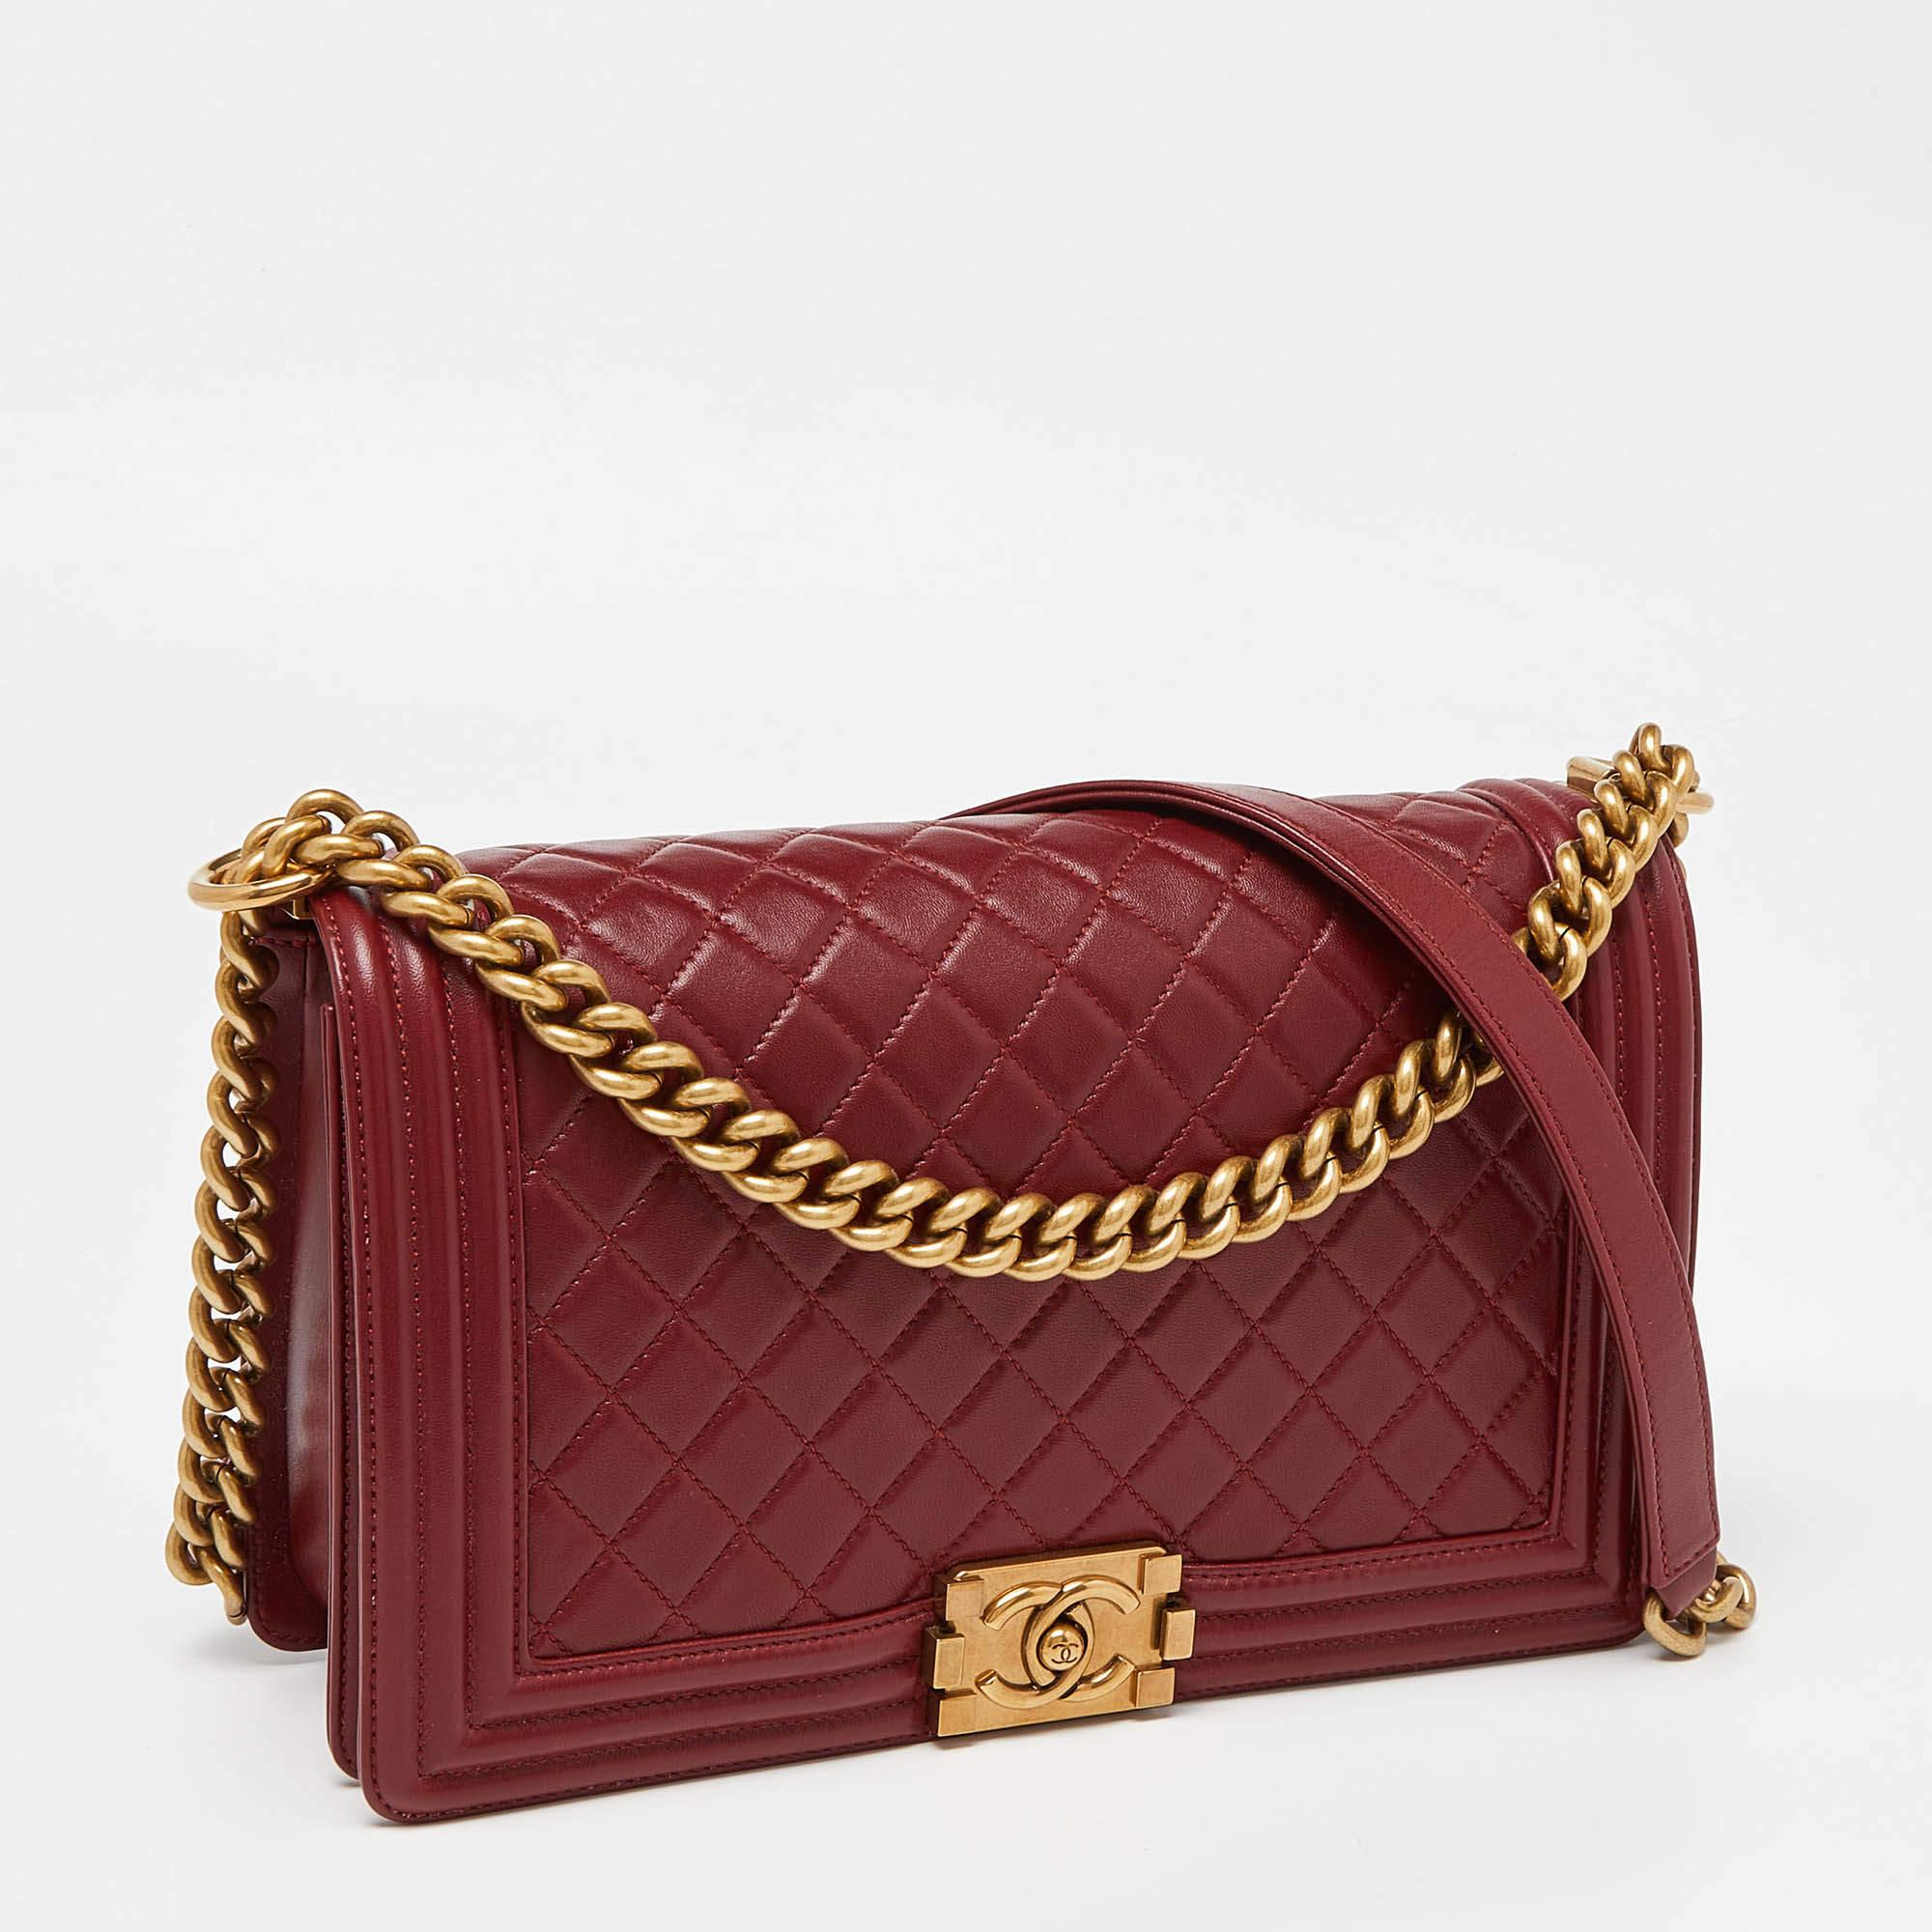 This stylish Boy flap bag from Chanel has been crafted from red leather. It opens to a capacious interior that can easily hold your everyday essentials. The bag is finished with gold-tone hardware.

